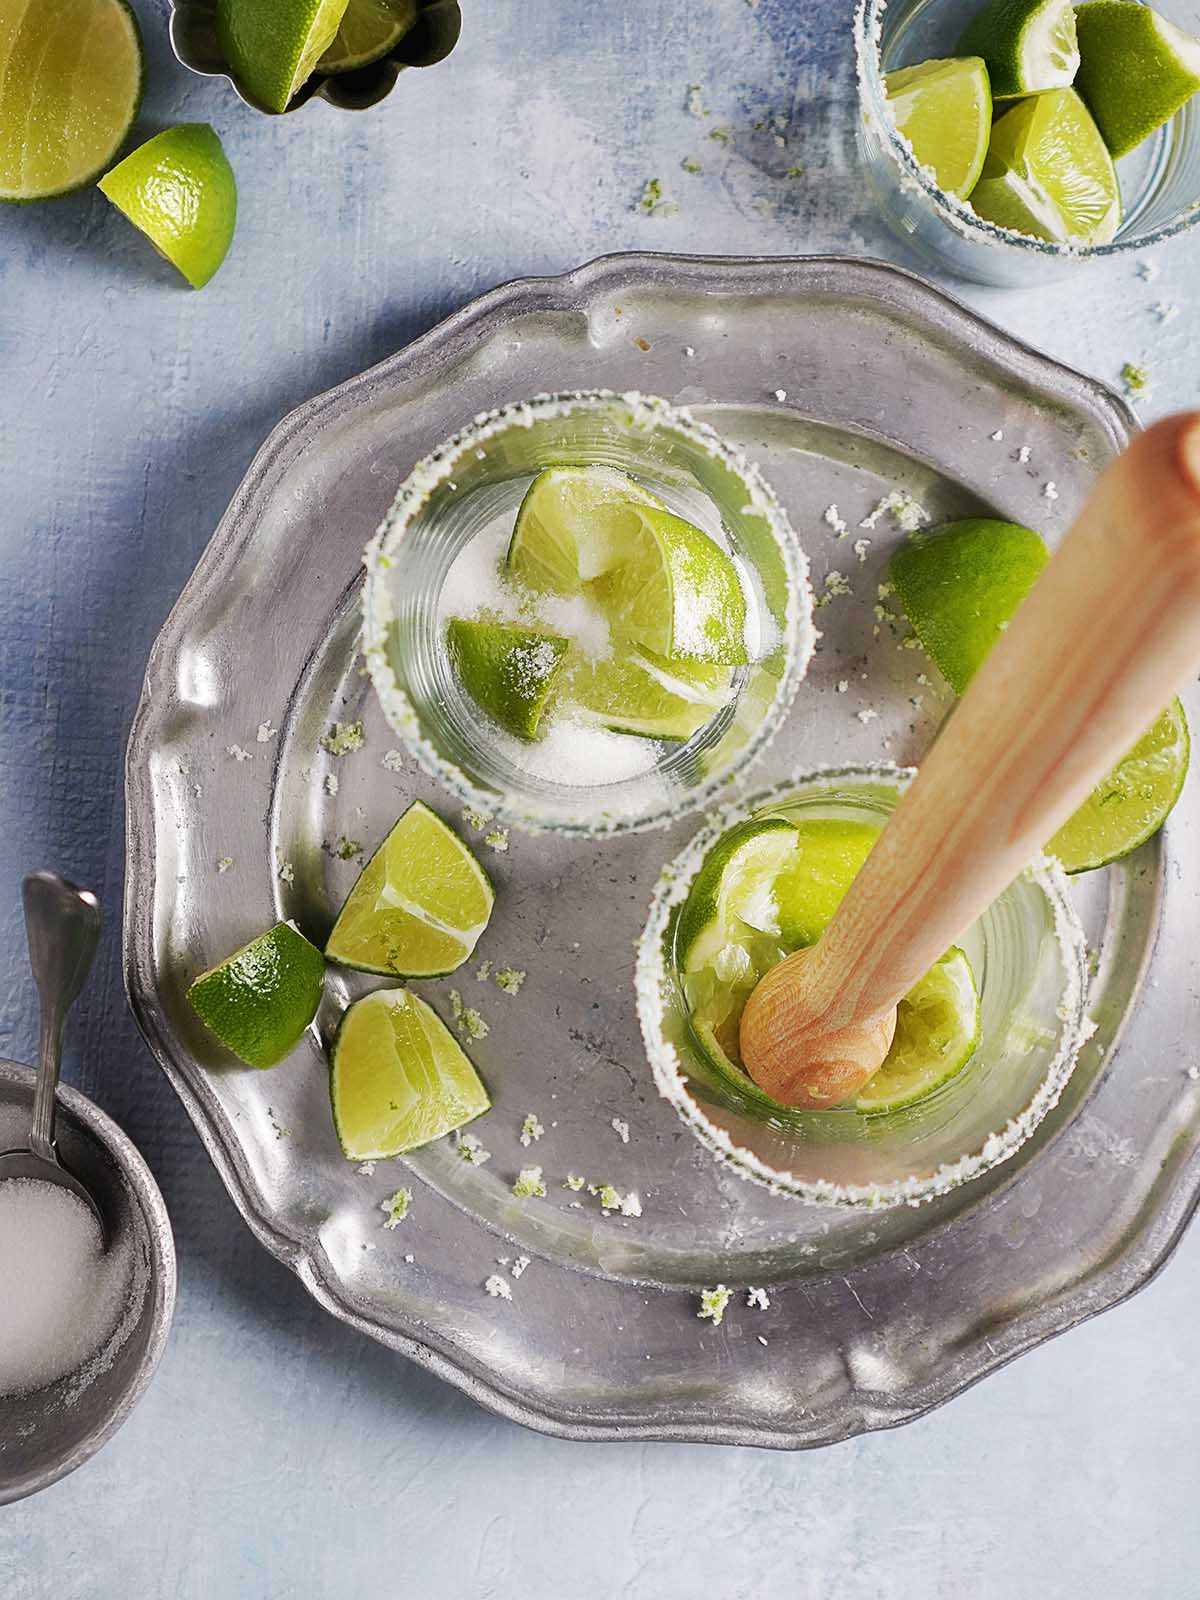 Crushing cut fresh limes with the sugar in a cocktail glass.